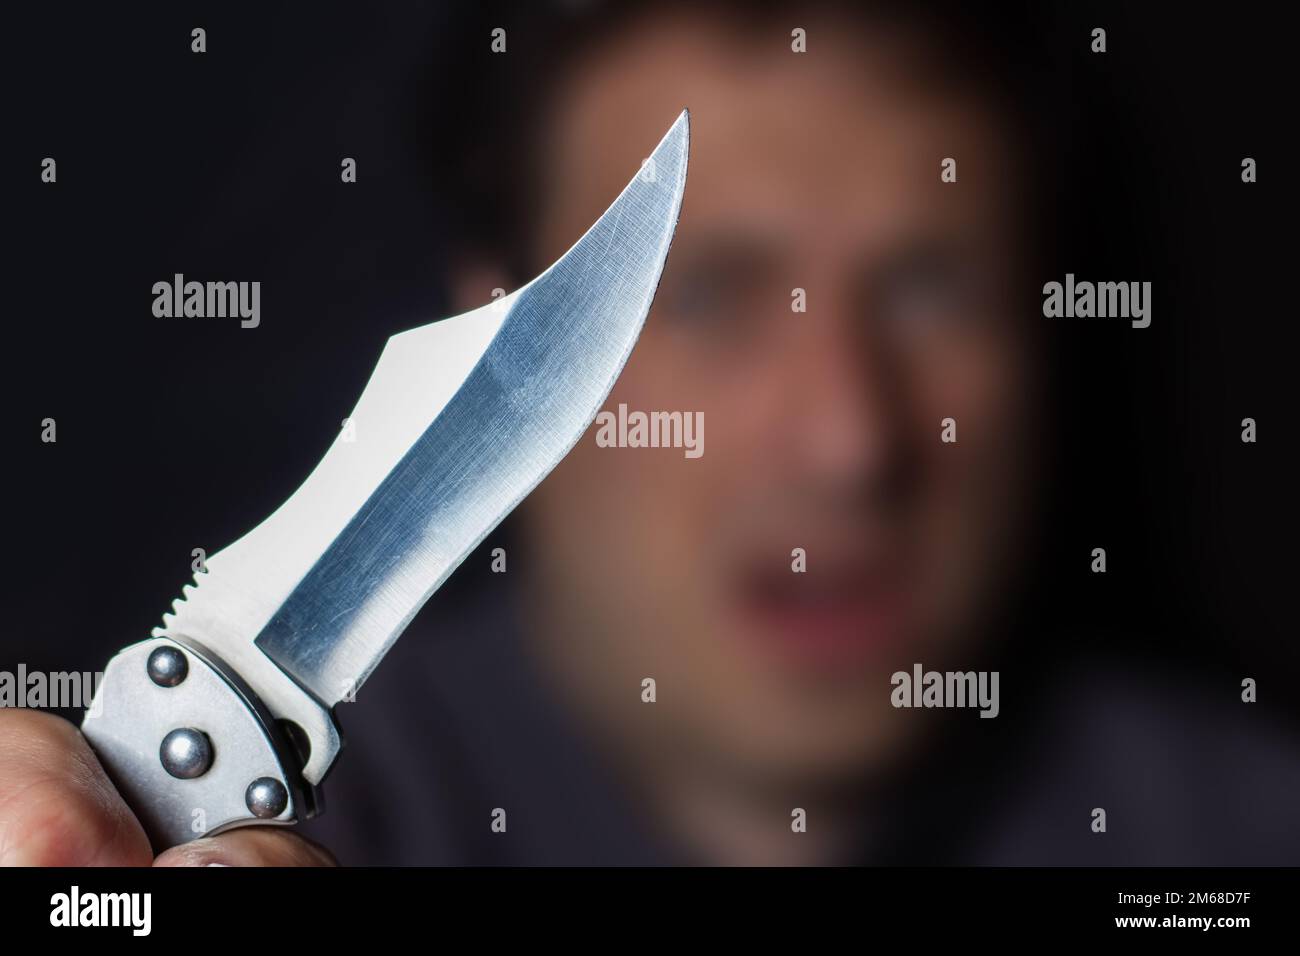 Close up of Hand with knife following young terrified man Bandit is holding a knife in hand. Threat Concept. Stock Photo